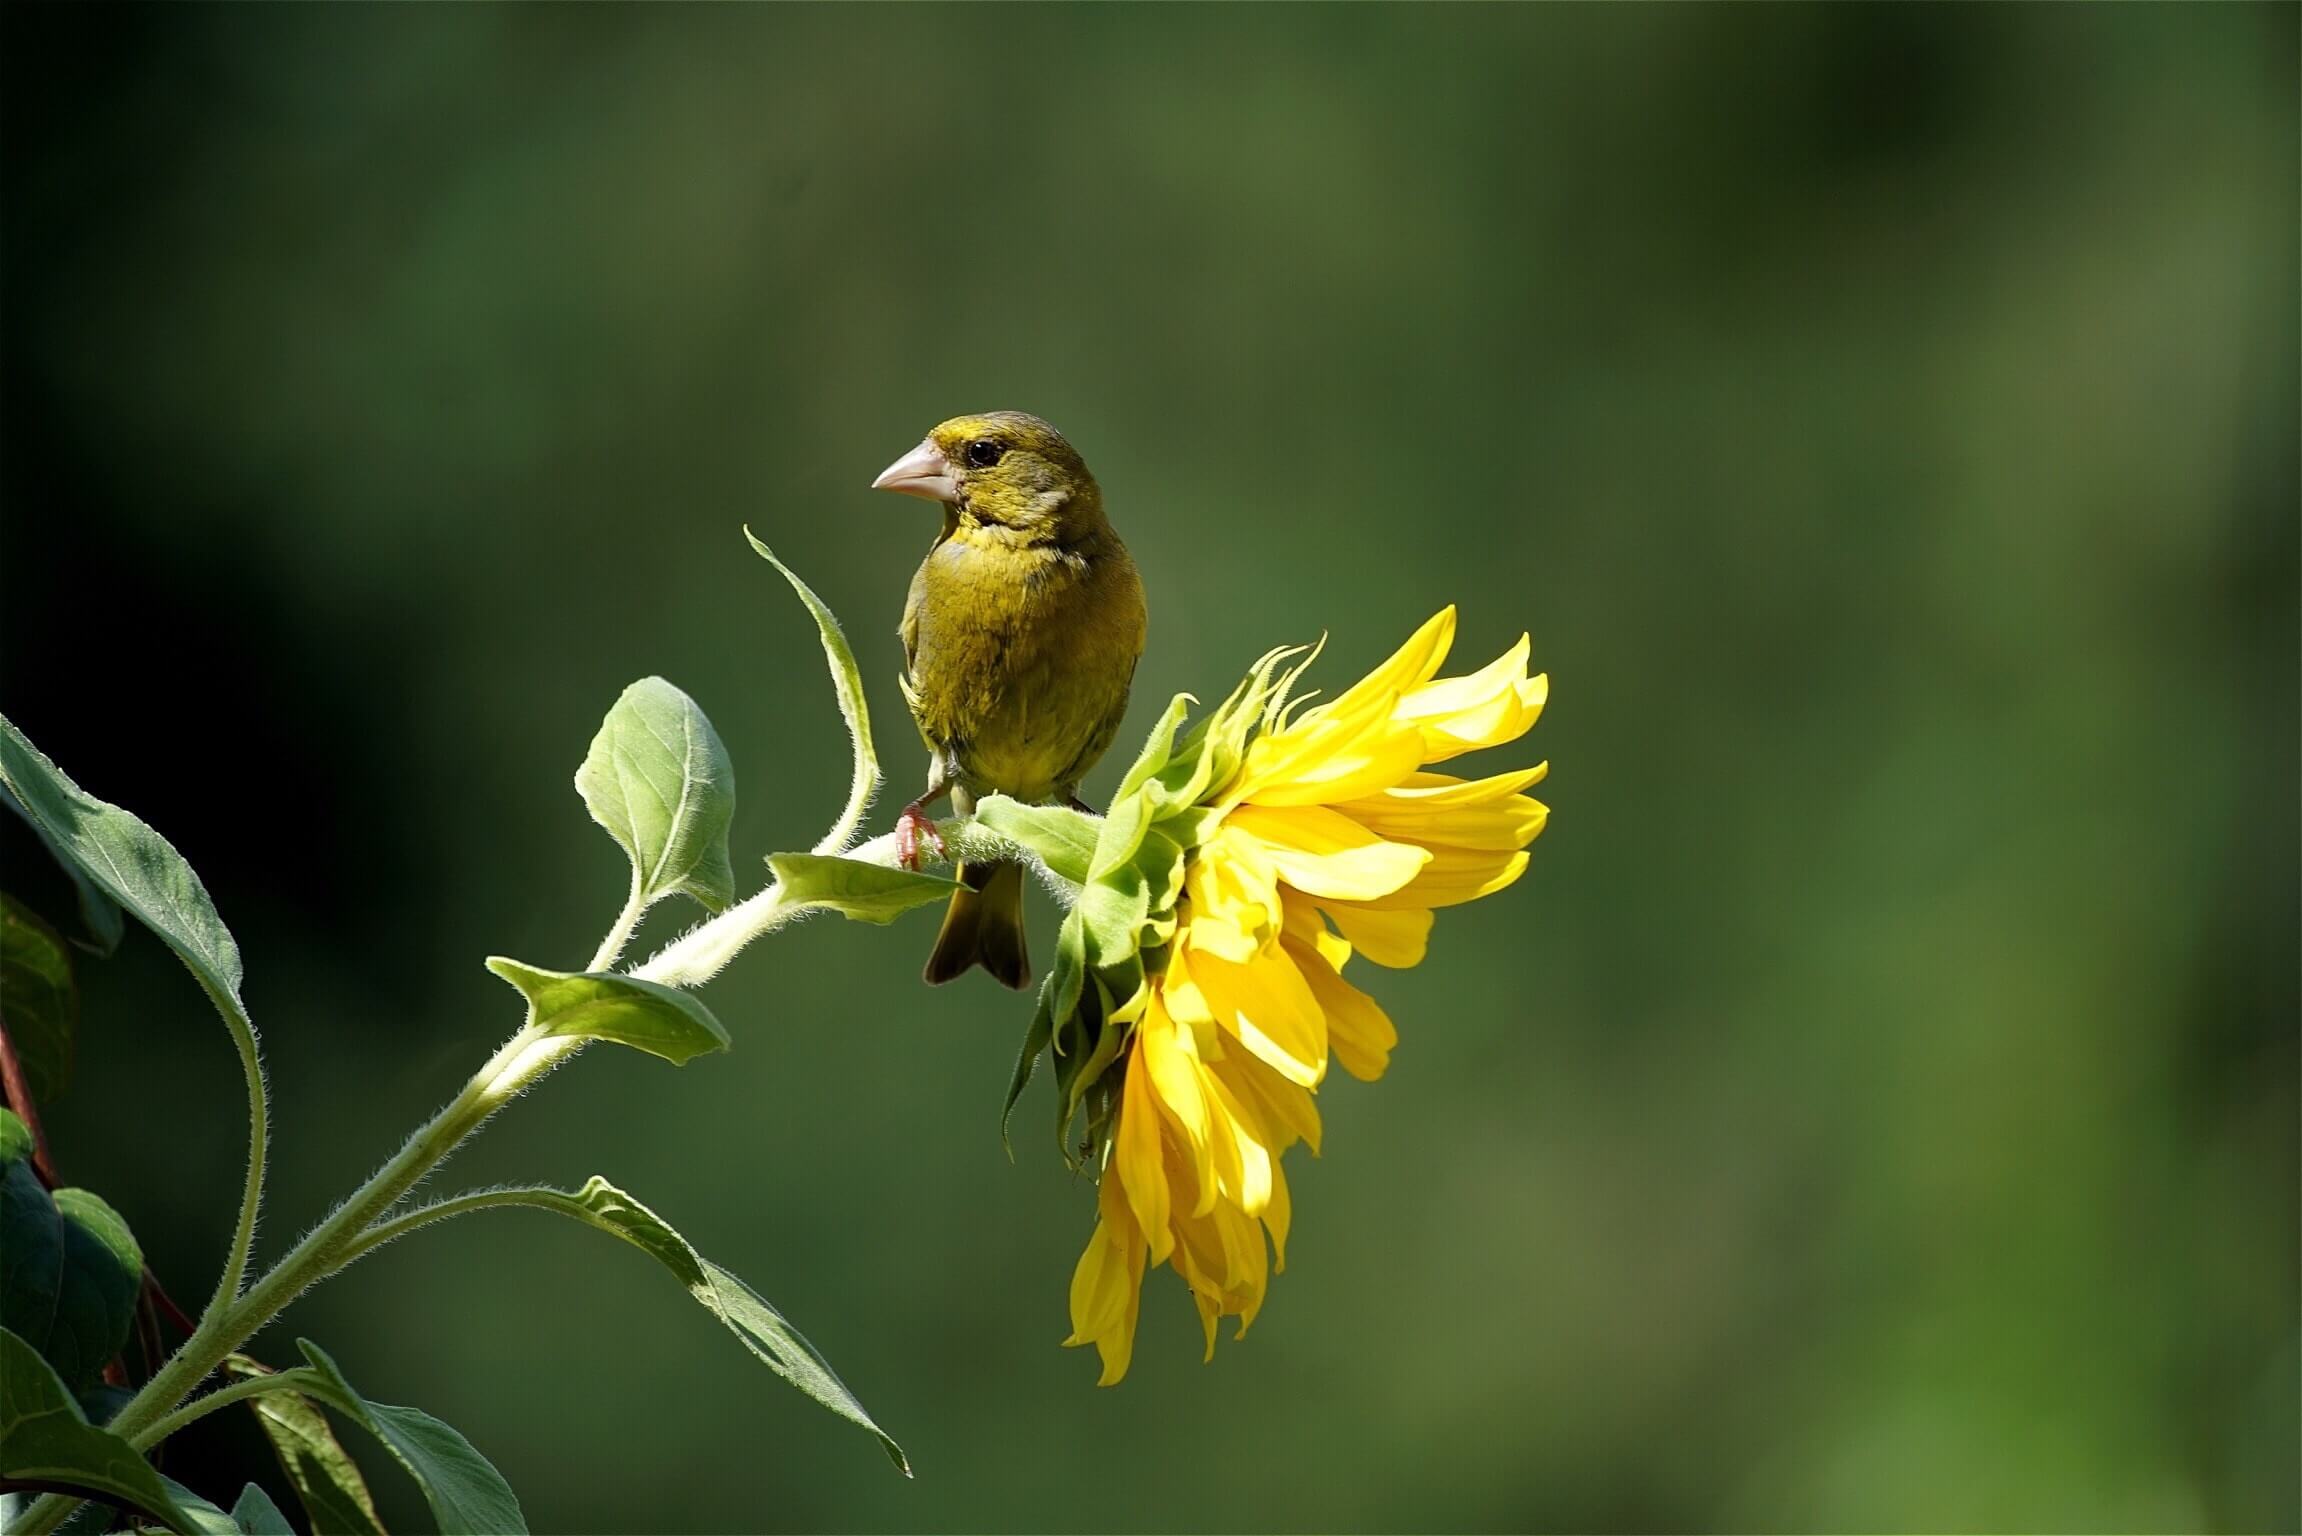 (Getty Images) Green finch with sunflower heart